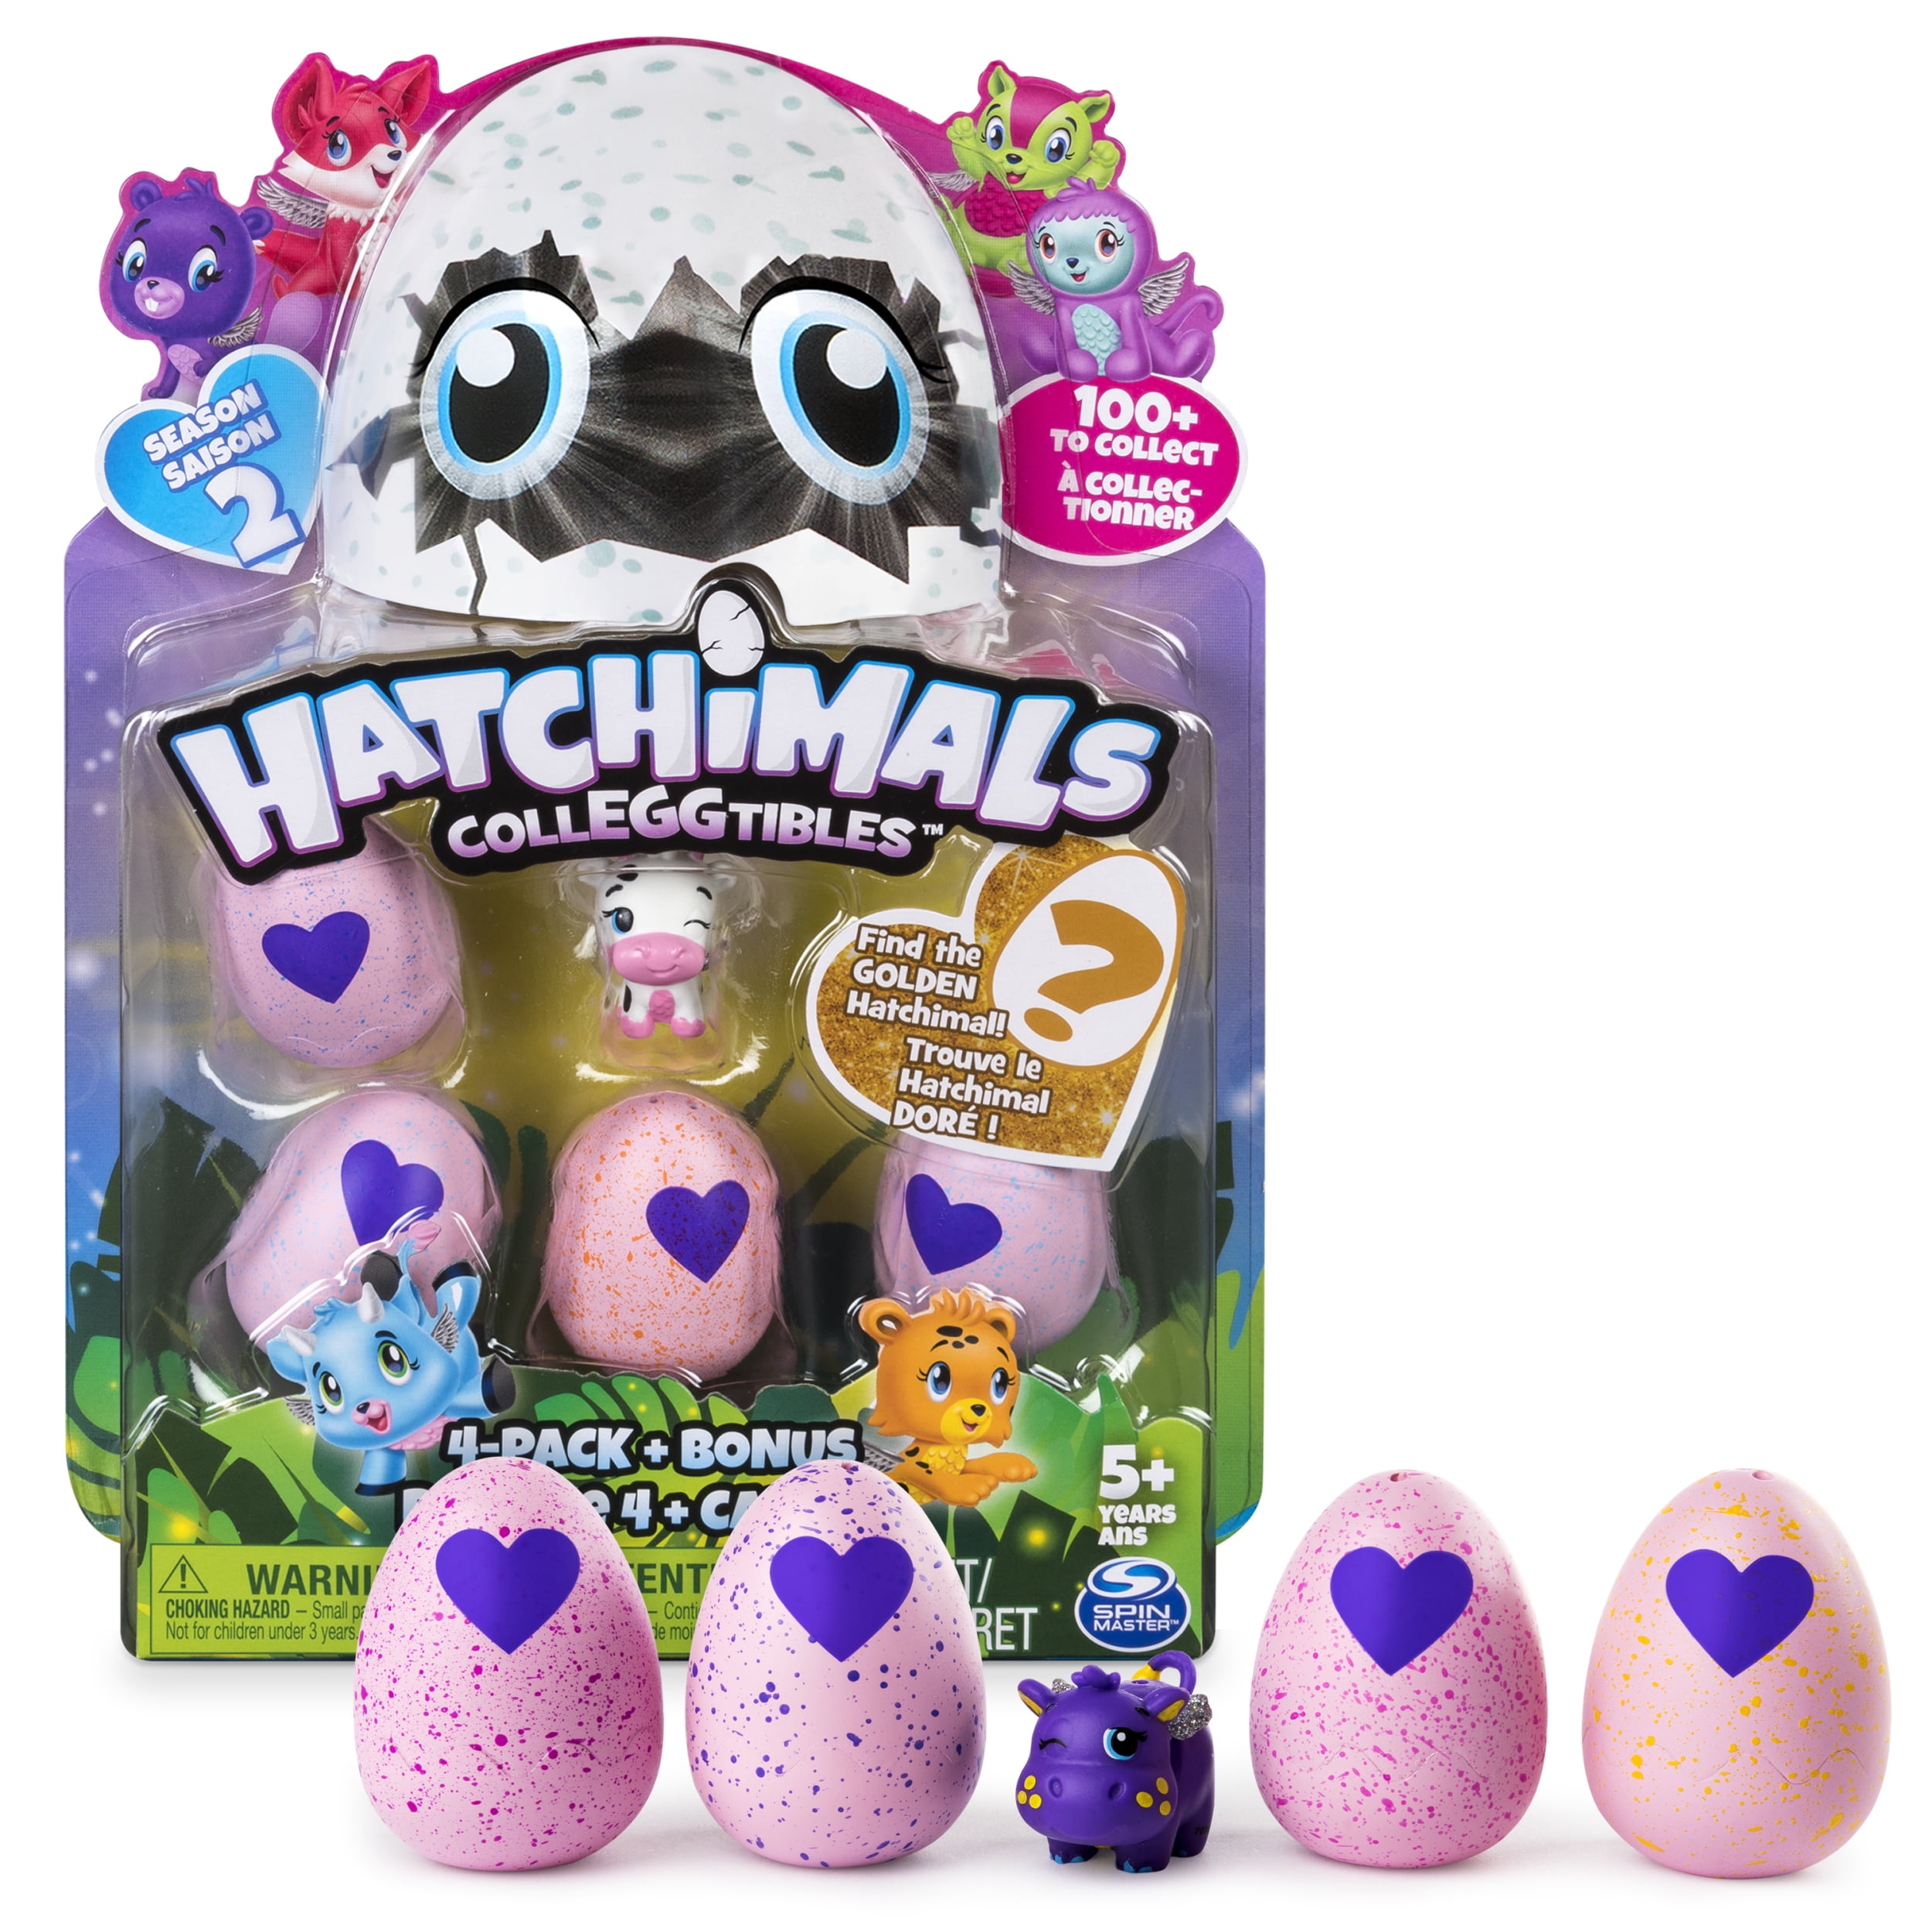 NEW Hatchimals Wow Llalacorn 32 inch Tall Interactive Toy with Re-Hatchable Egg 